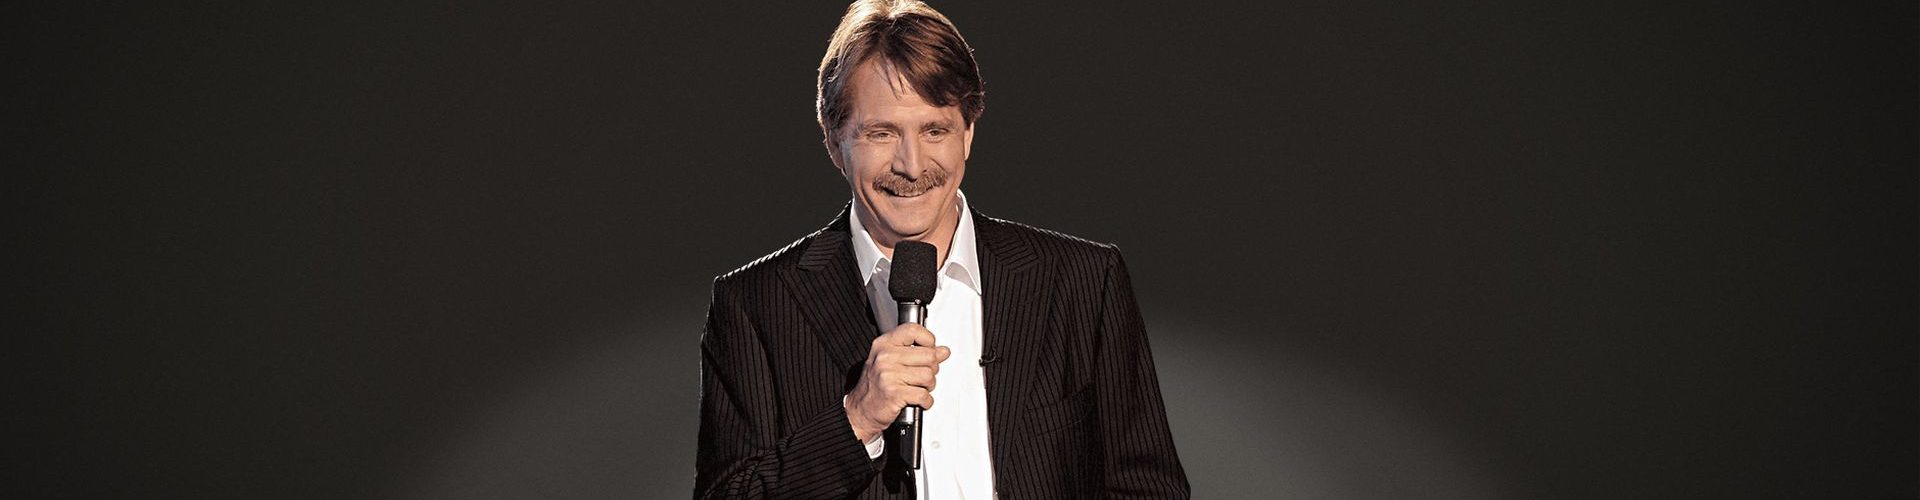 Jeff Foxworthy to Perform in Branson at the Mansion Theatre on September 22, 2018